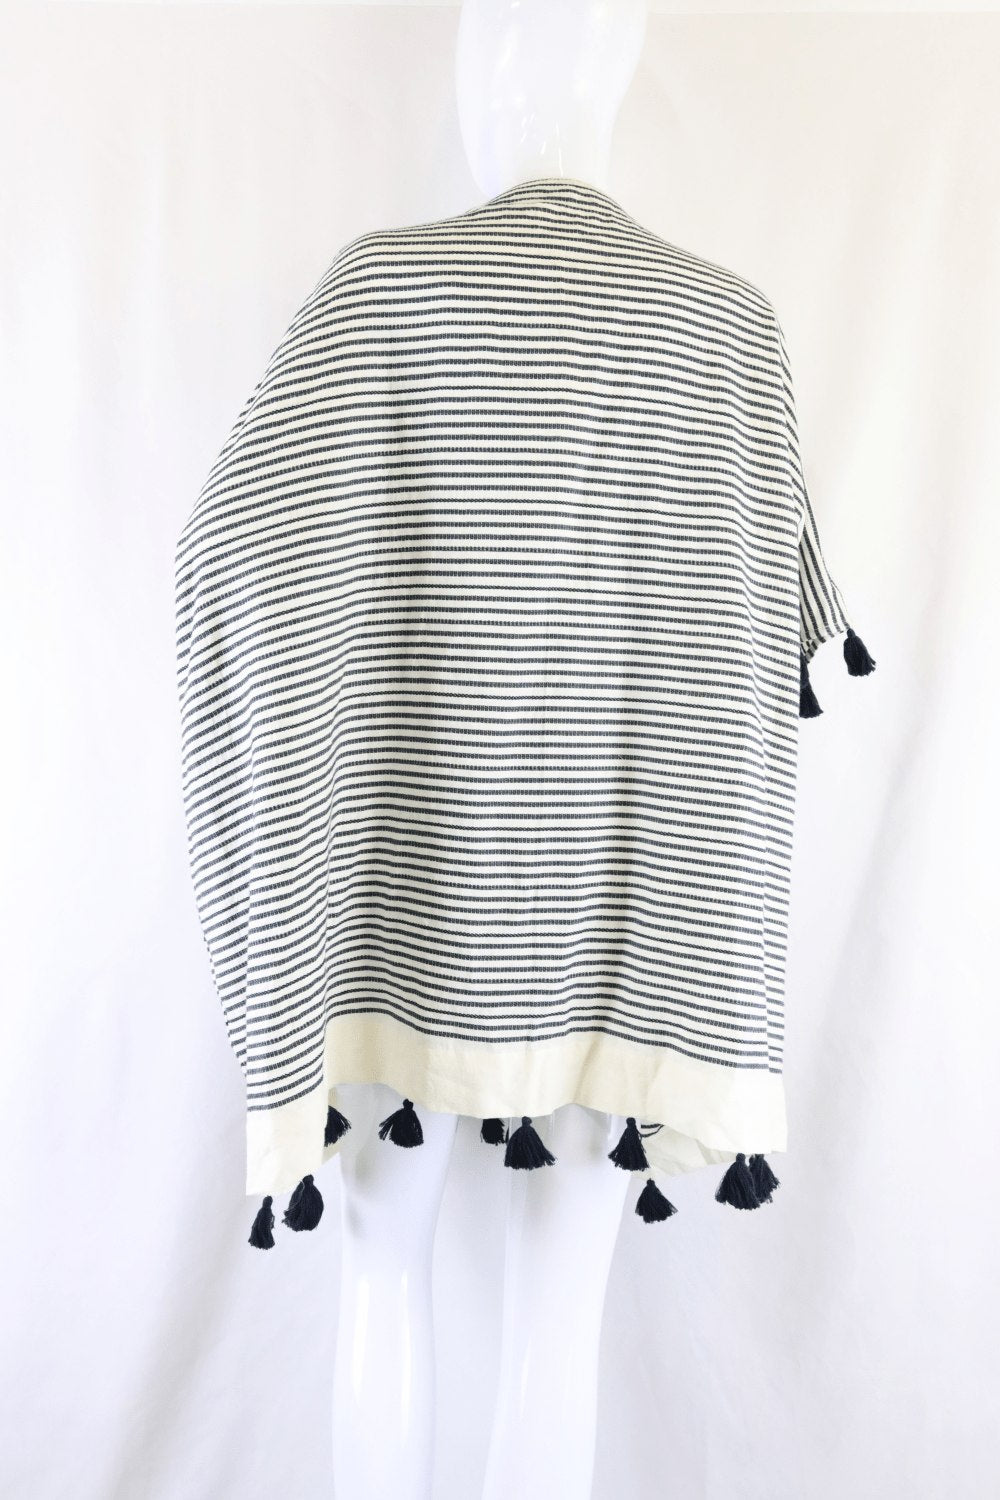 Seed heritage Black And White Striped Cardigan OS